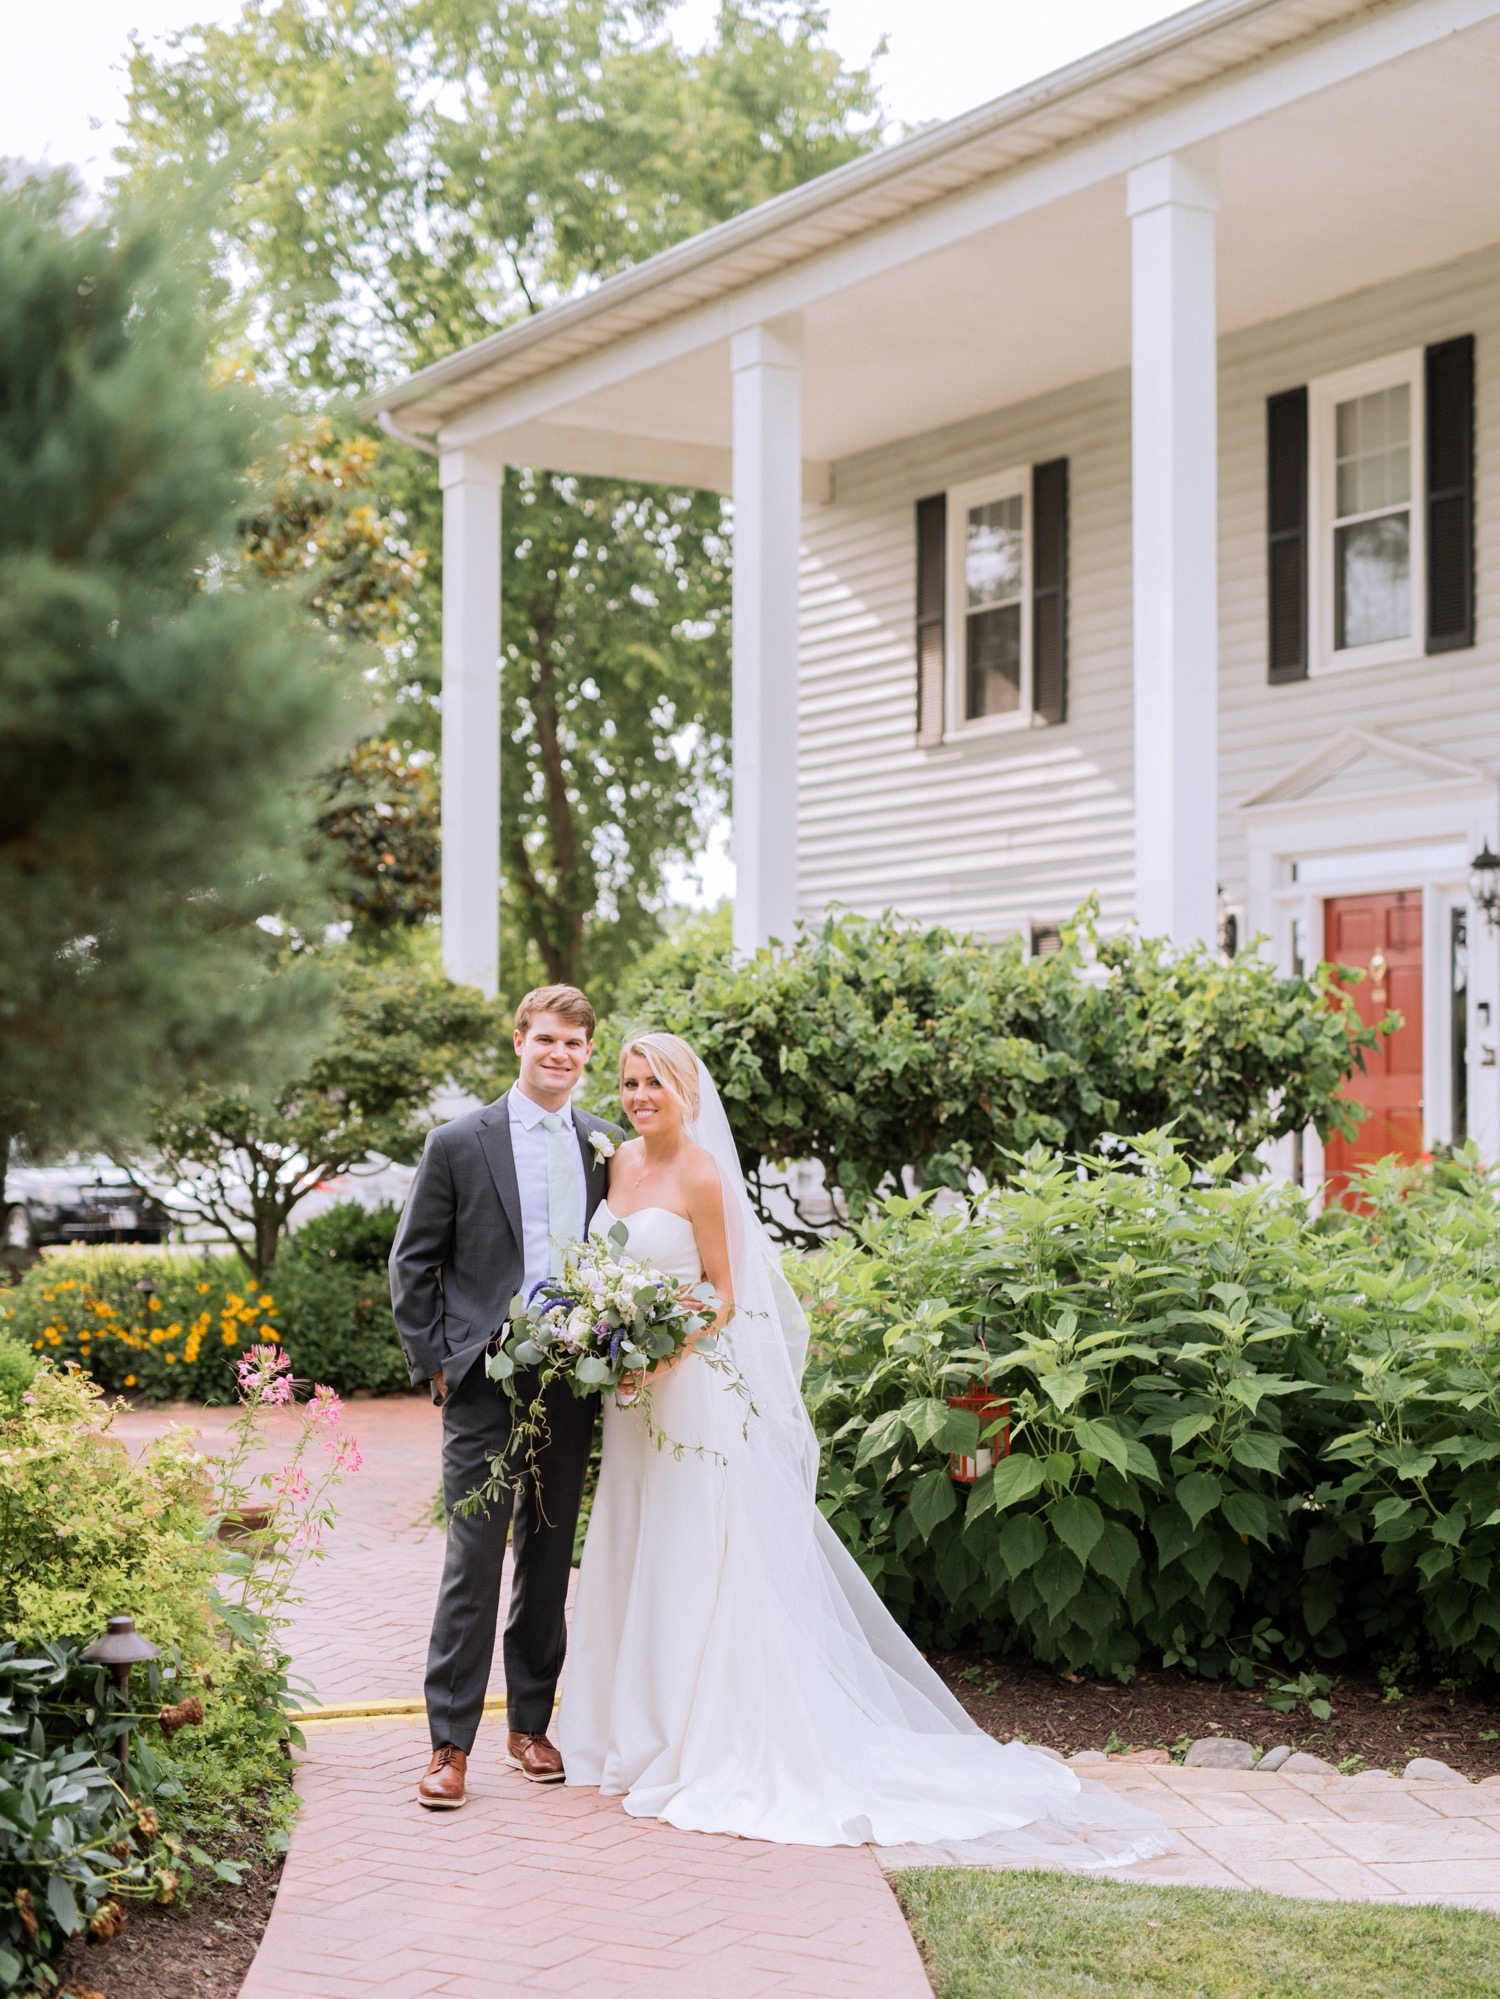 Bride and groom celebrating their wedding day in front of their venue- Amber Grove in Richmond, Virginia